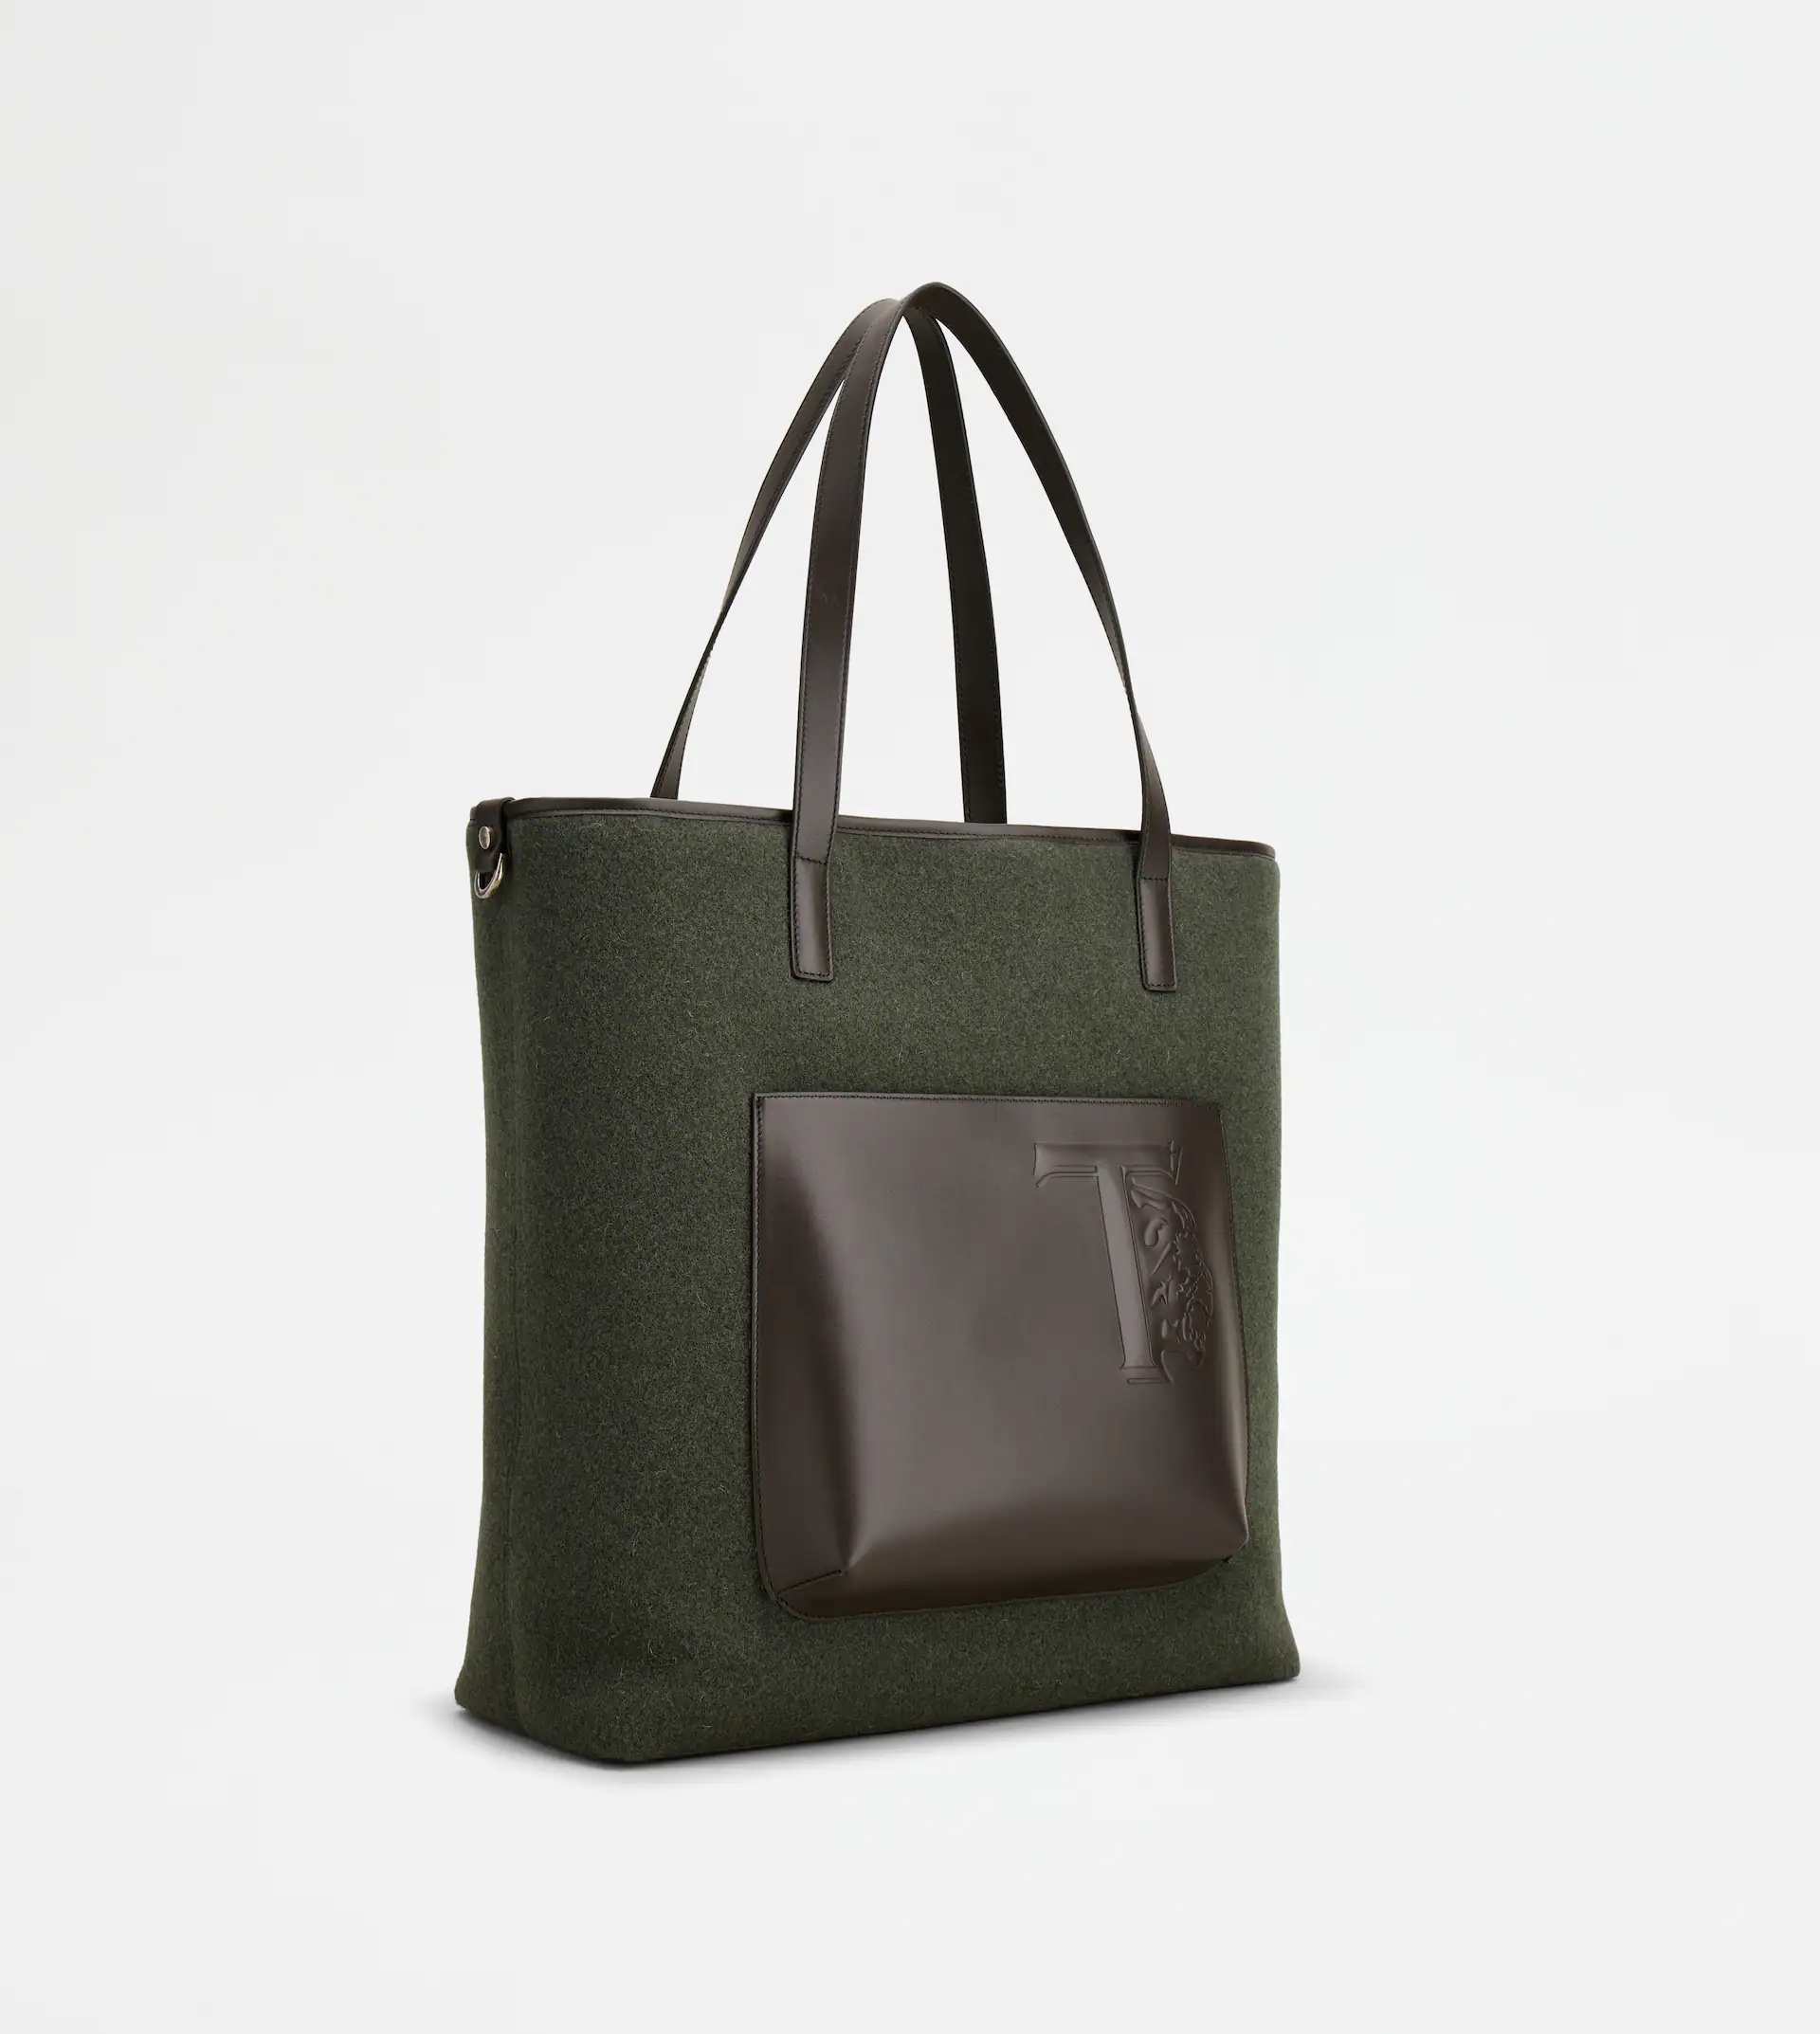 SHOPPING BAG IN FELT AND LEATHER MEDIUM - GREEN, BROWN - 2